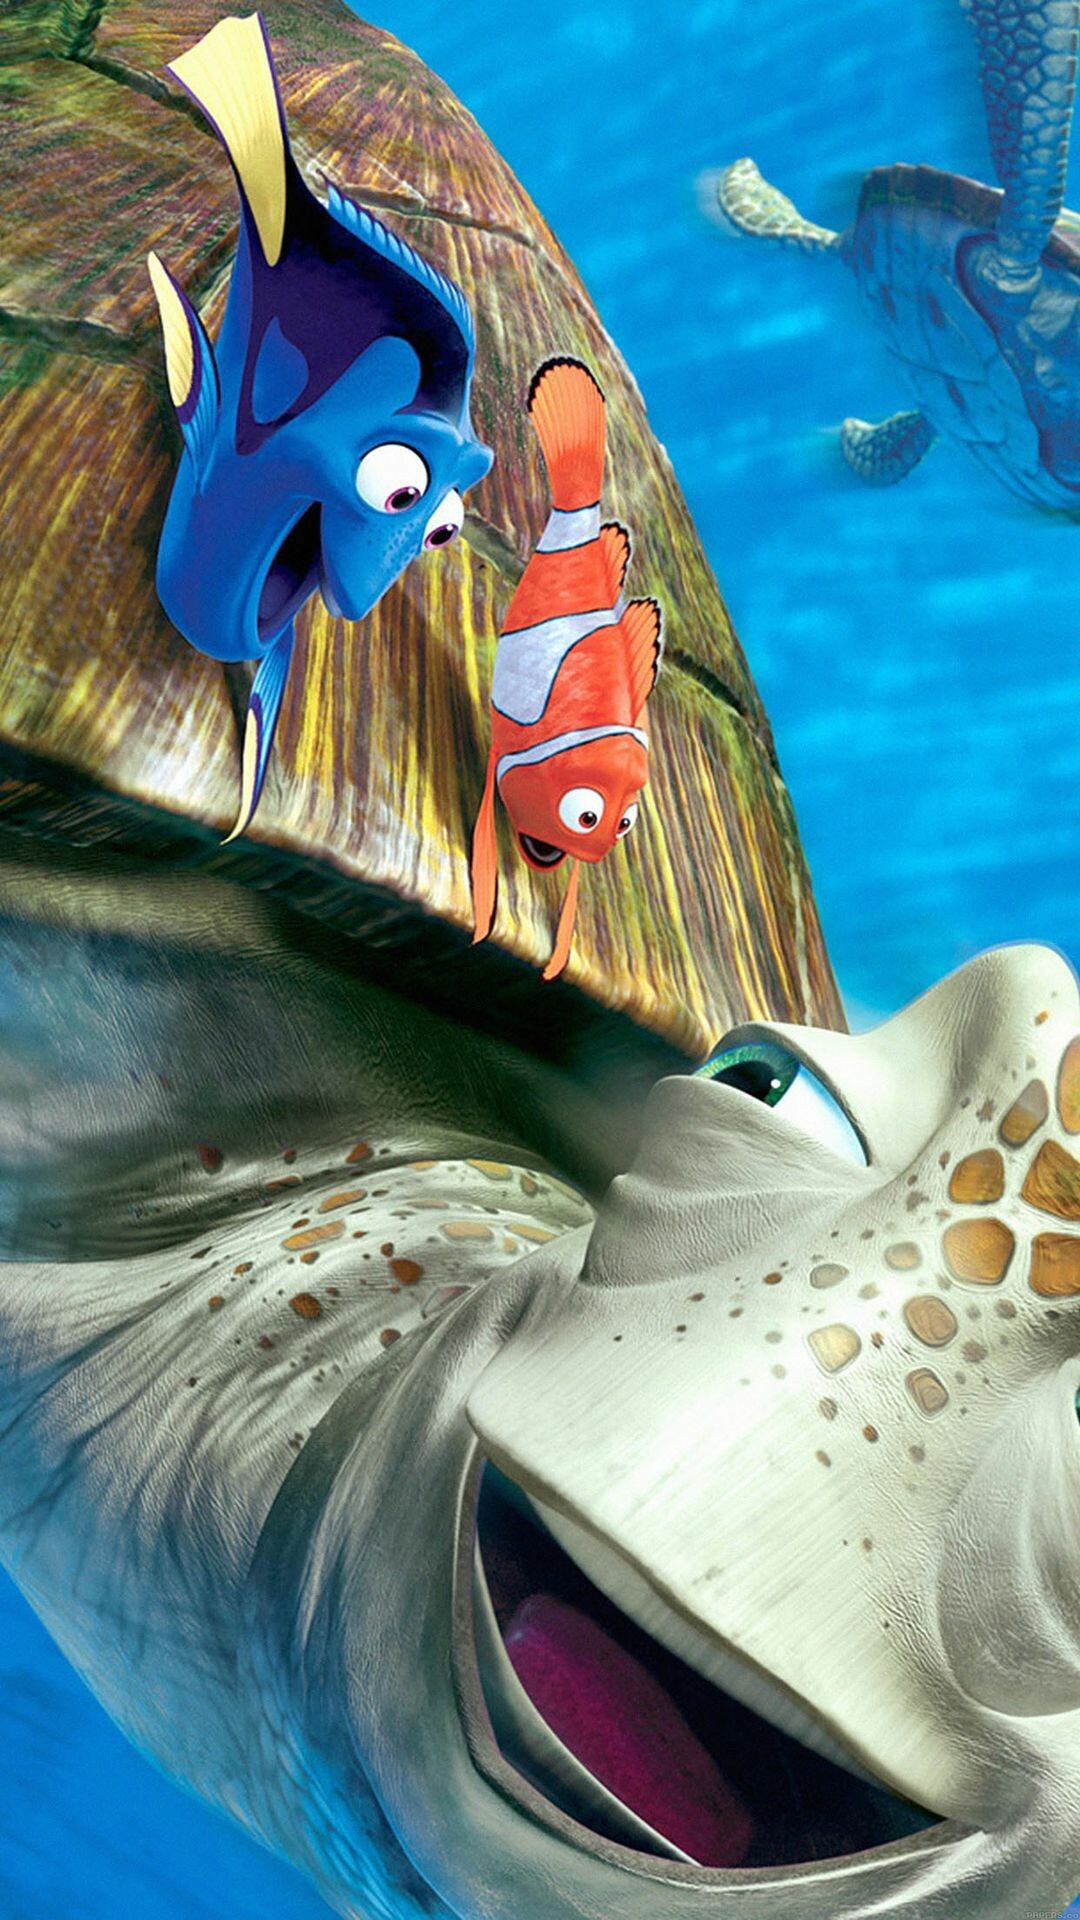 Finding Nemo: Crush, A sea turtle and a supporting character in Disney/Pixar's 2003 animated film. 1080x1920 Full HD Wallpaper.